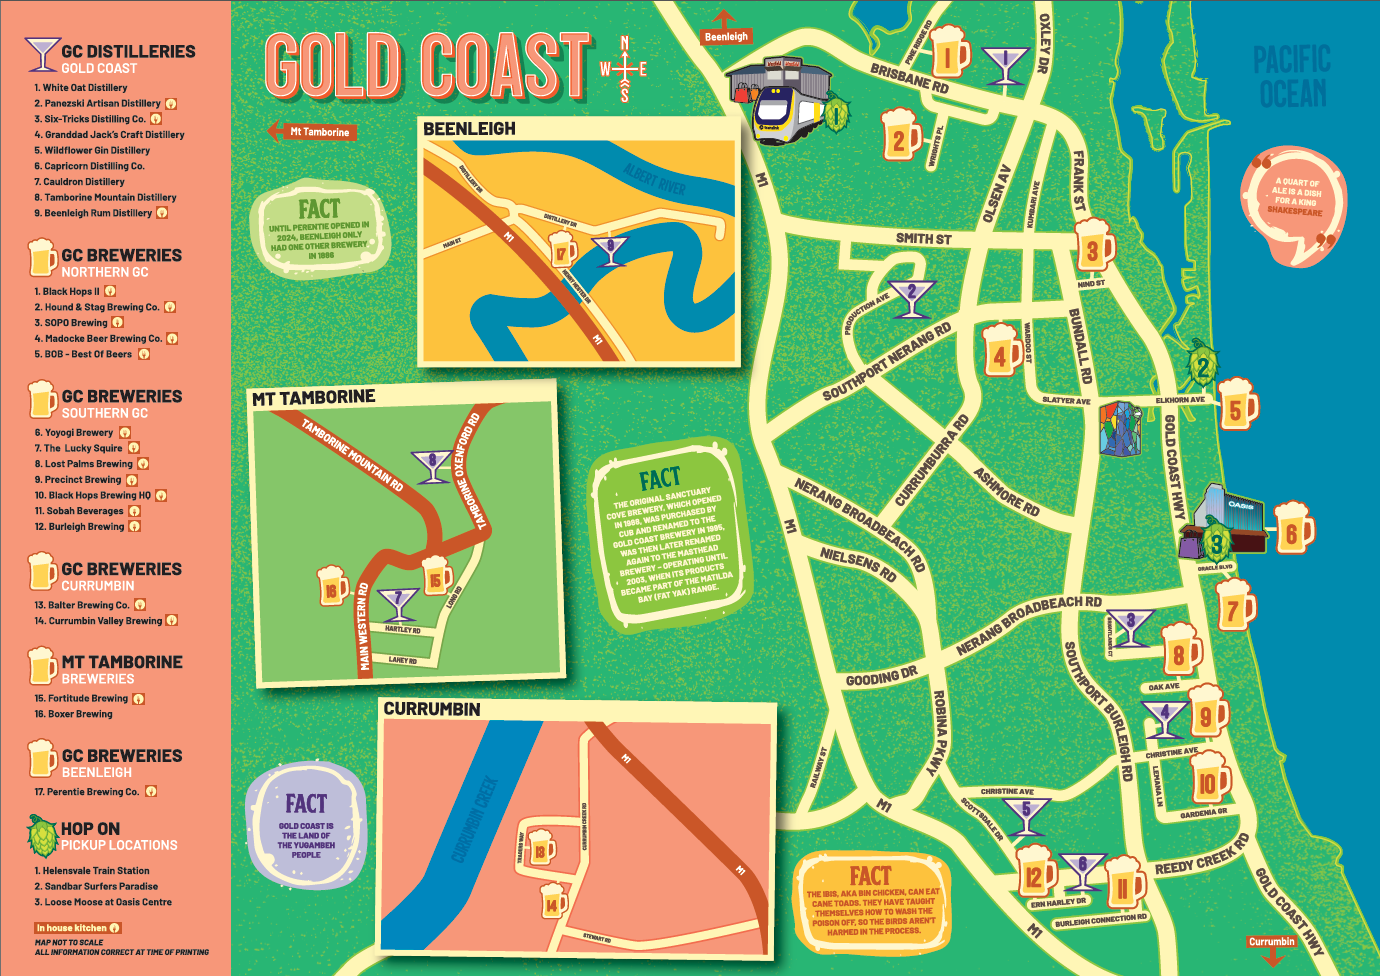 Gold Coast Ale Trail – Map of Gold Coast Breweries and Distilleries